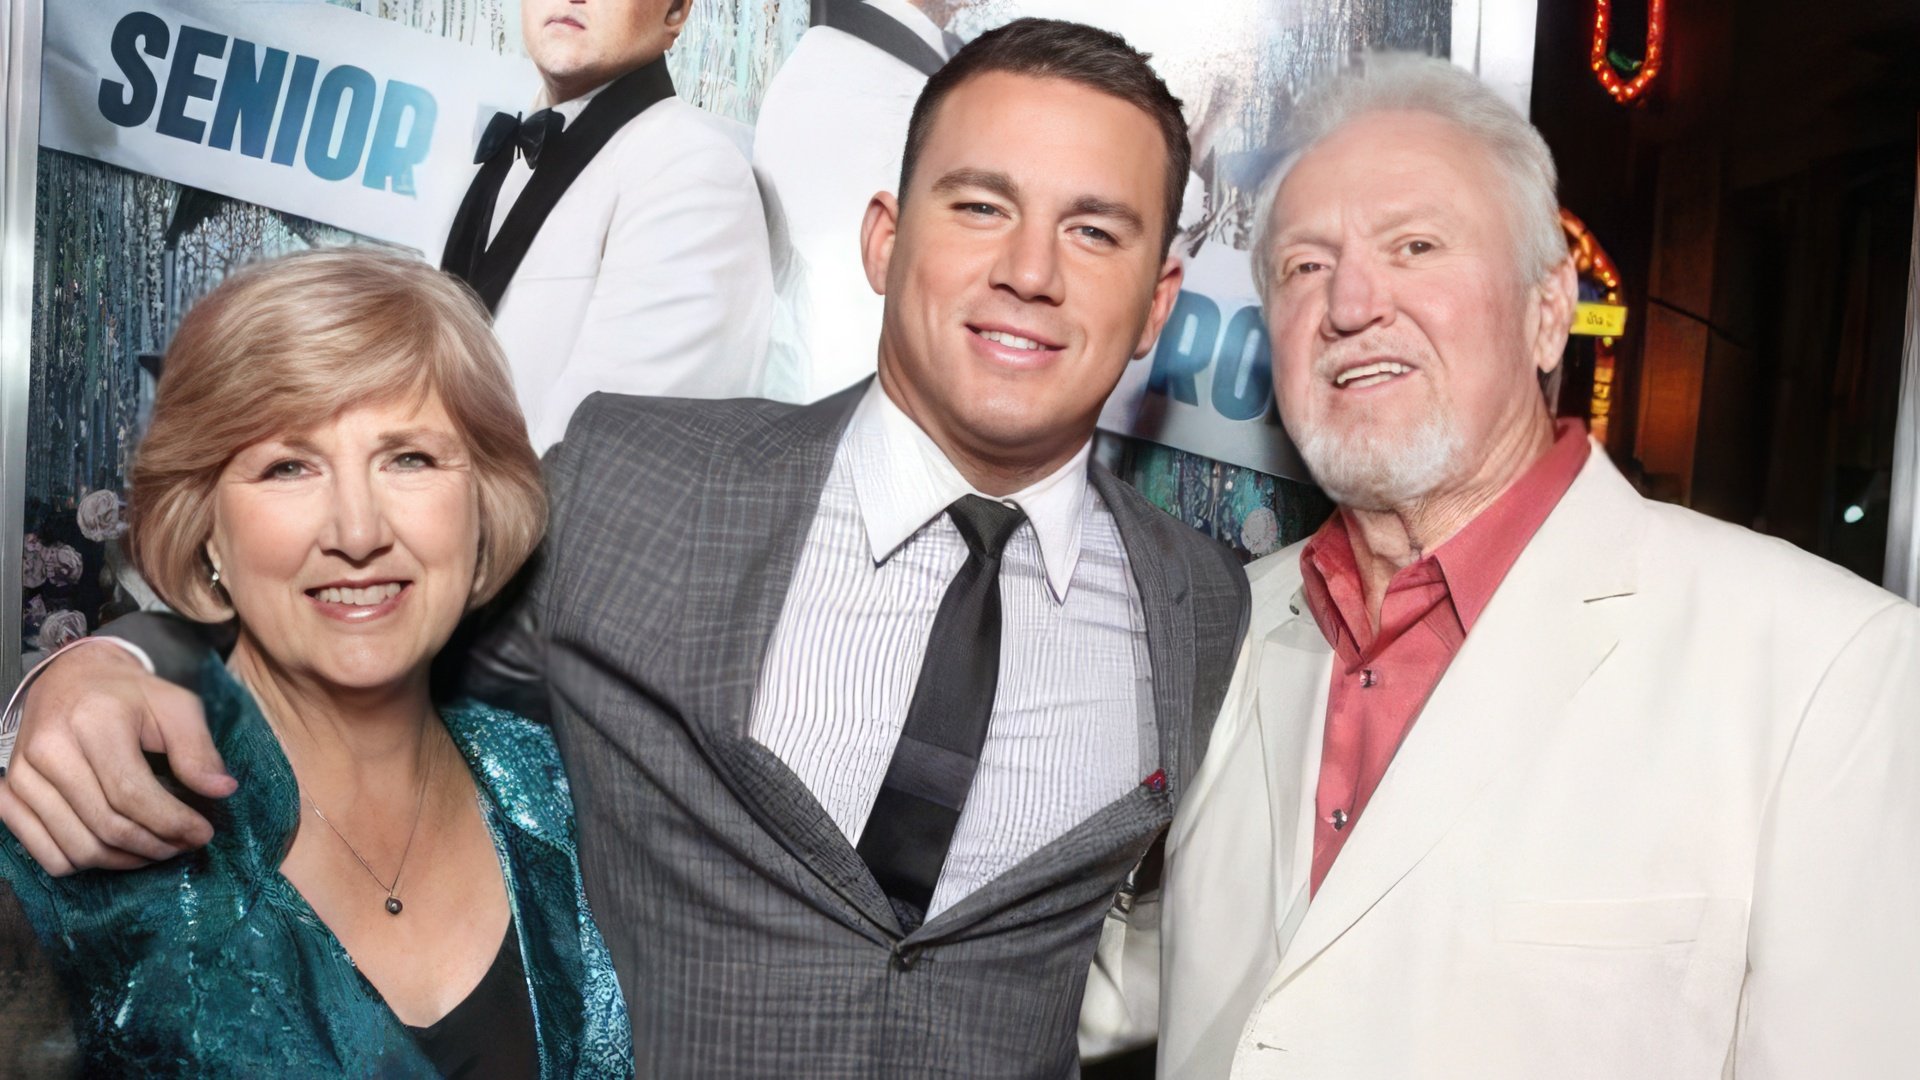 Channing Tatum with his parents